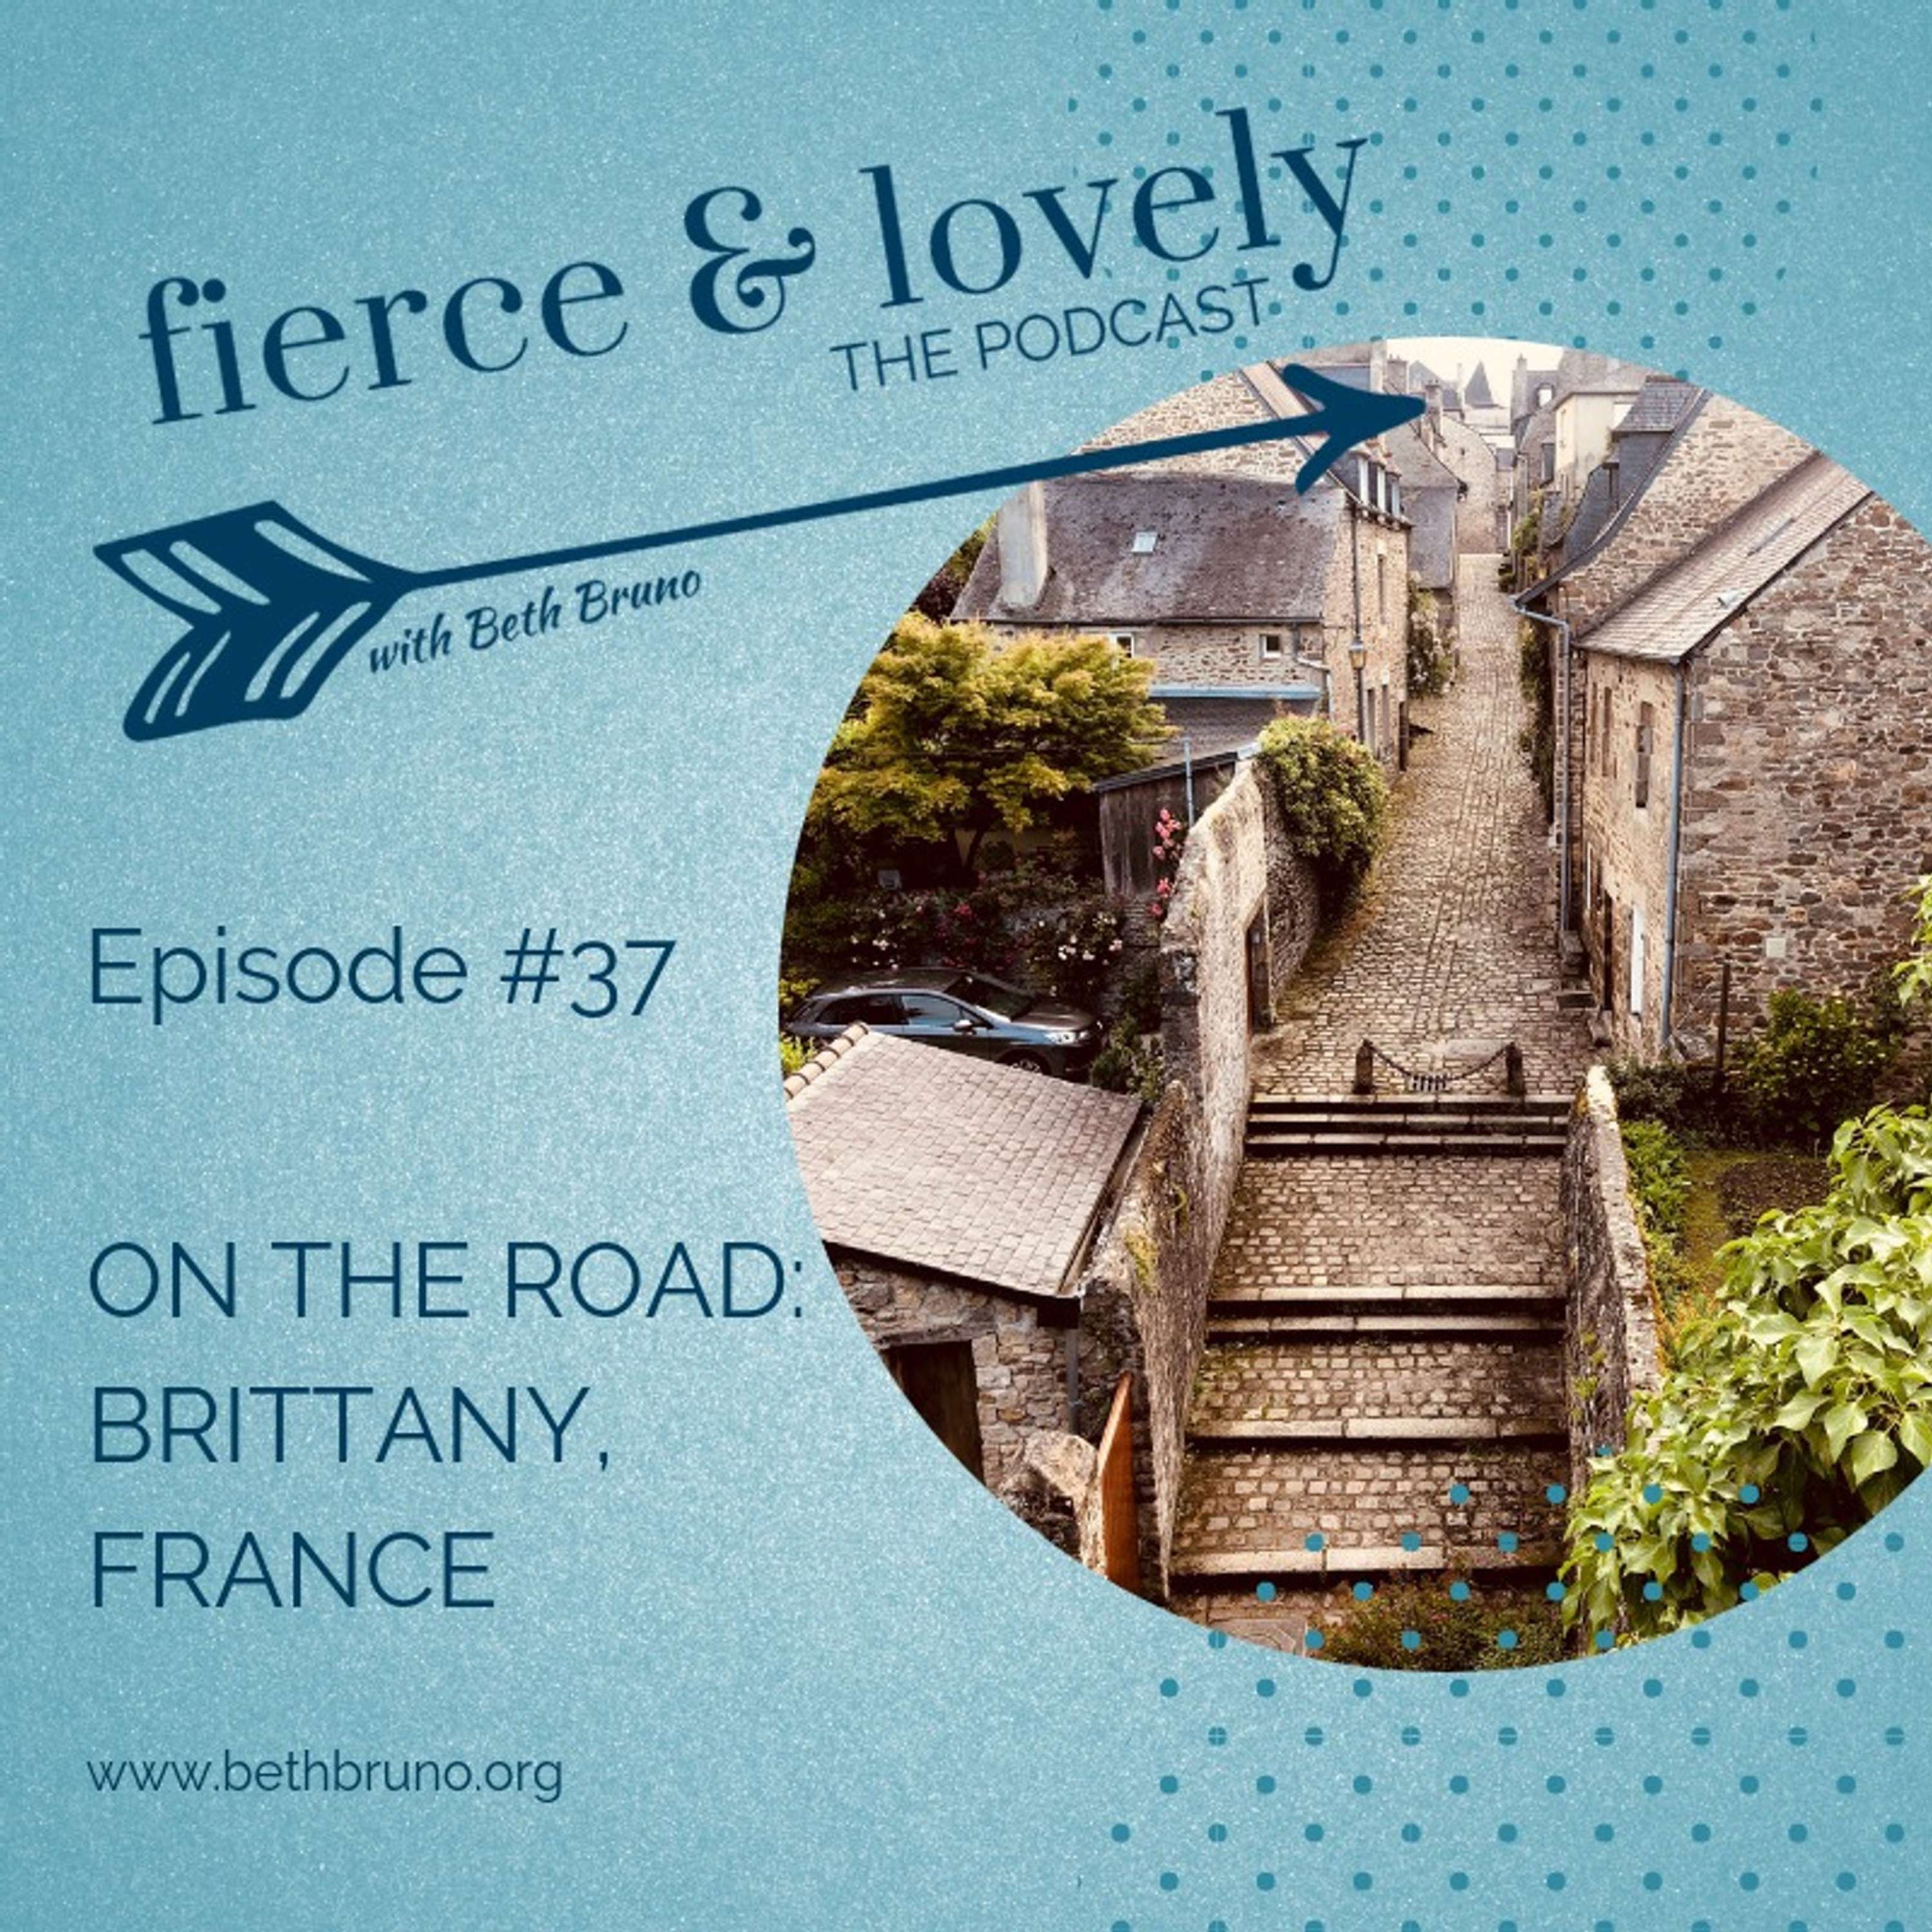 On the Road: Brittany, France